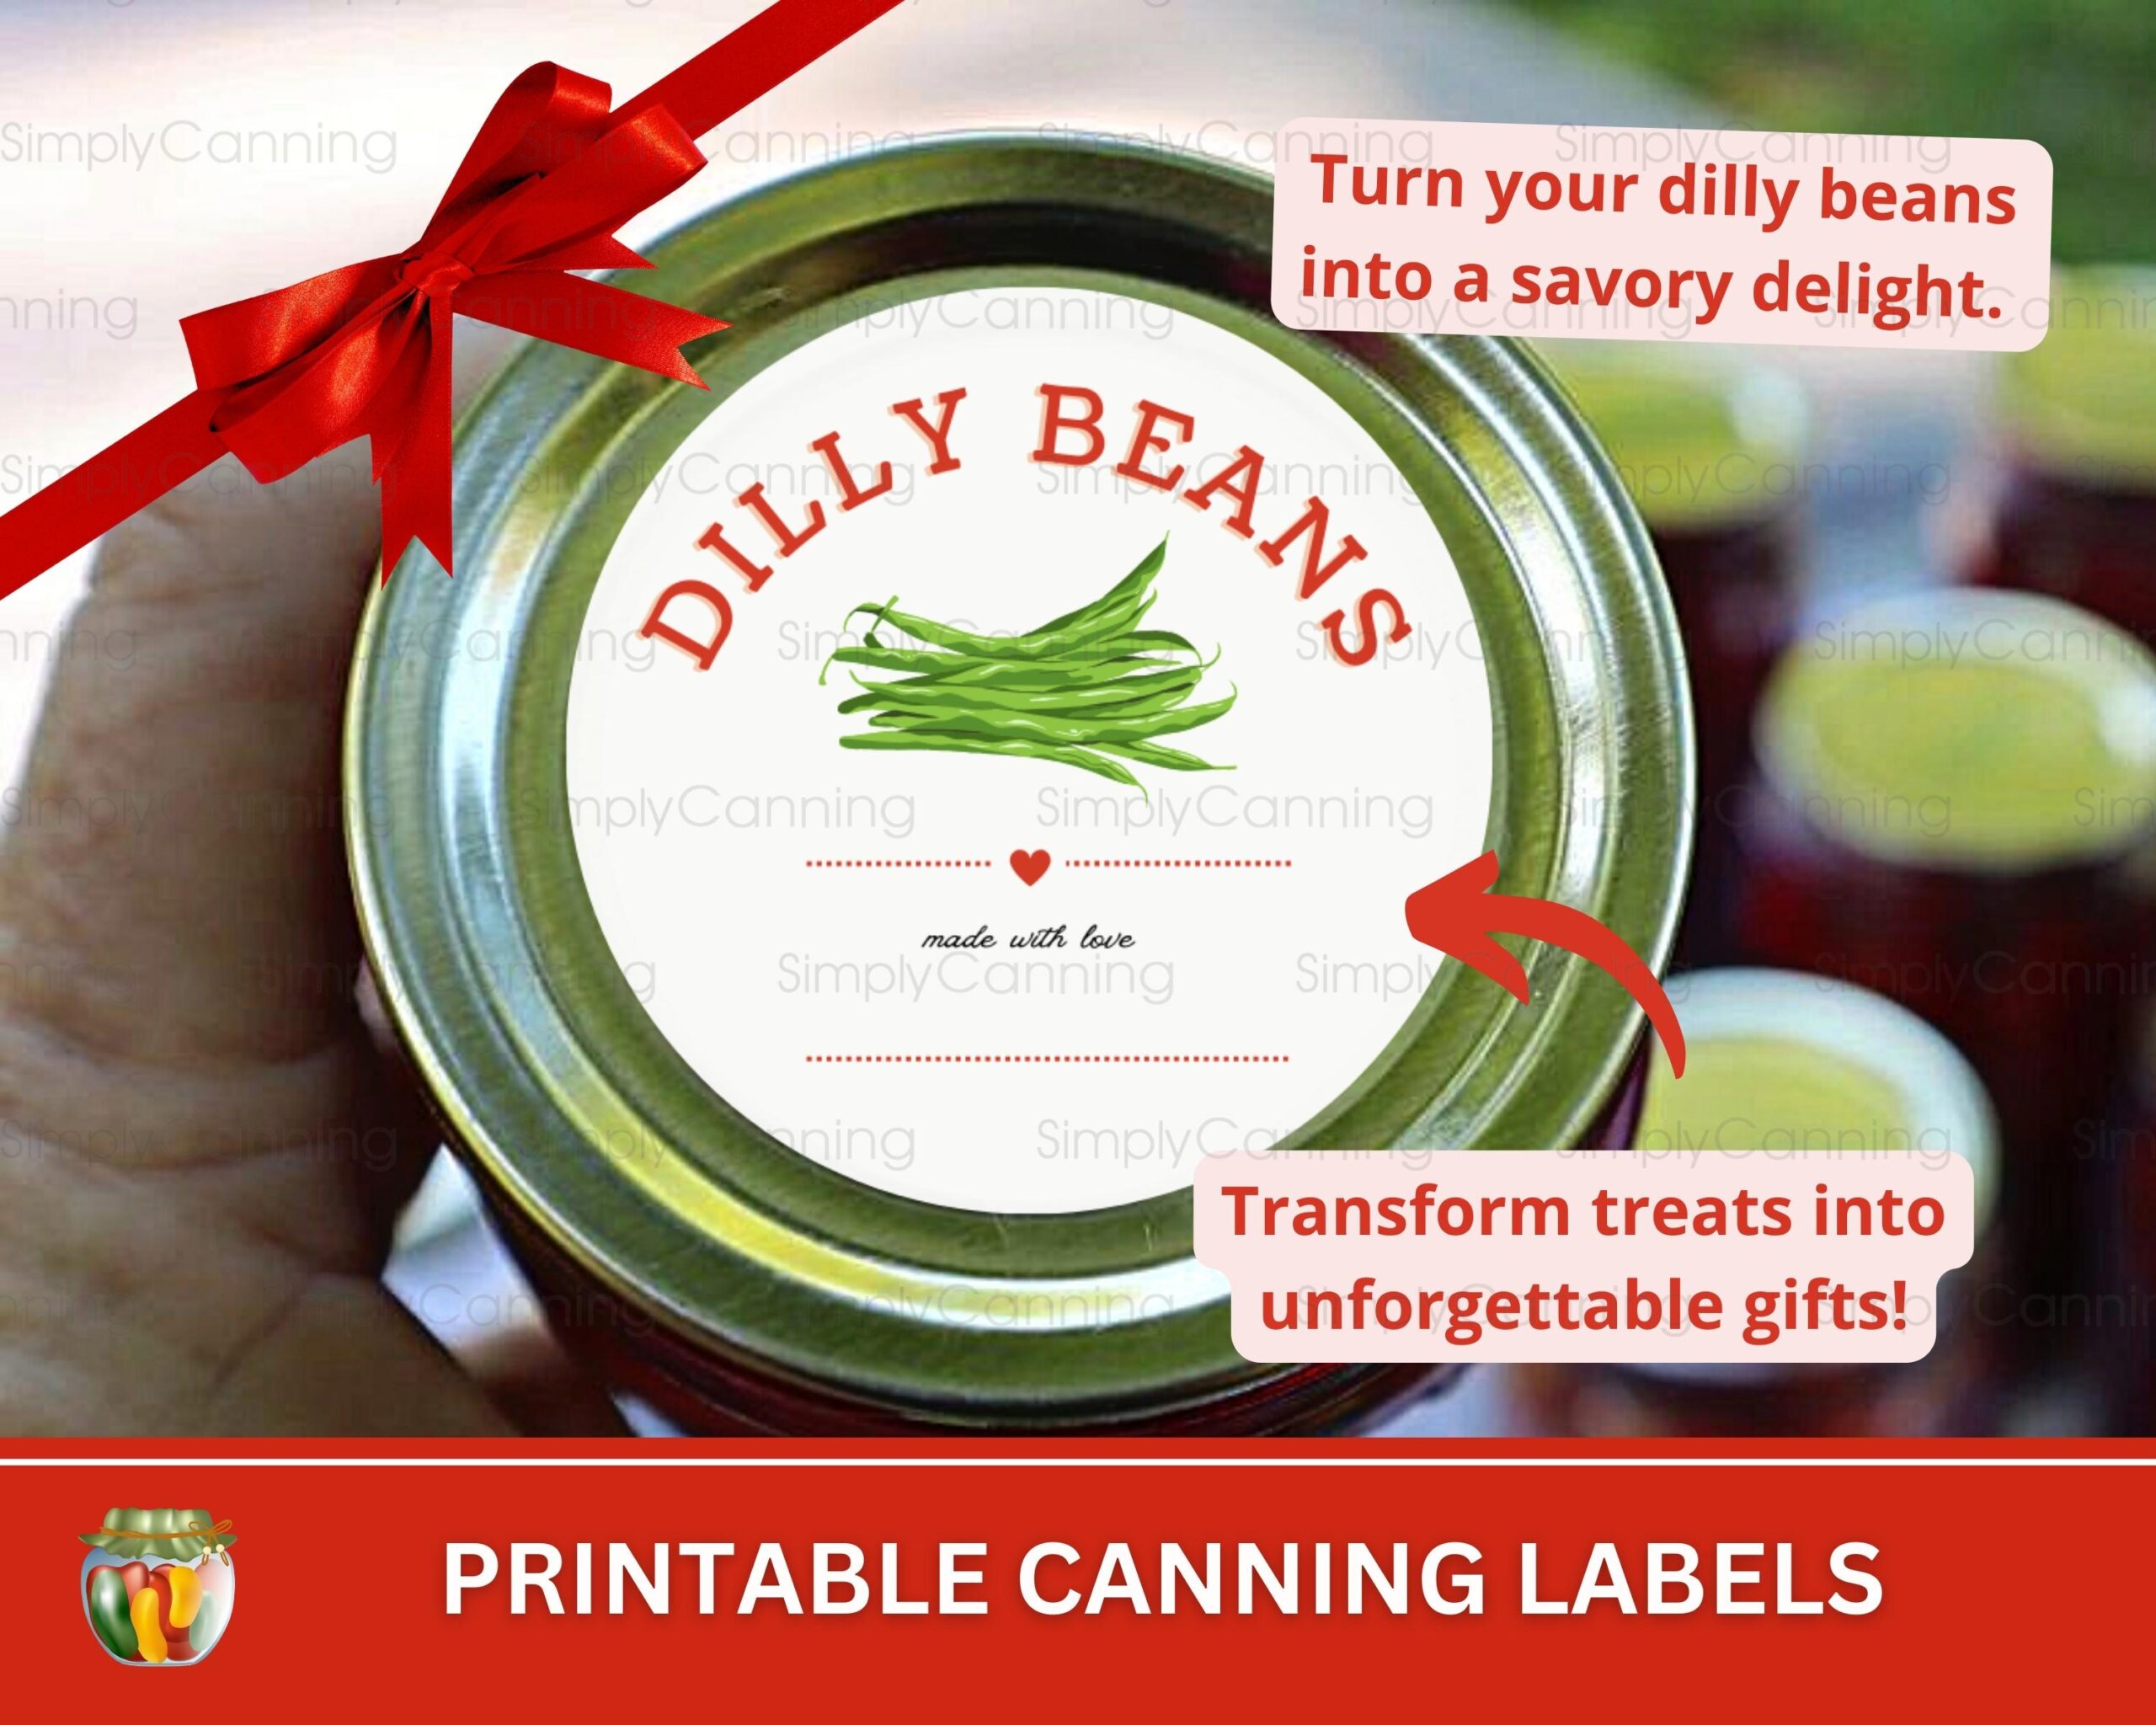 Image of dilly beans canning label, links to printable canning labels to purchase.